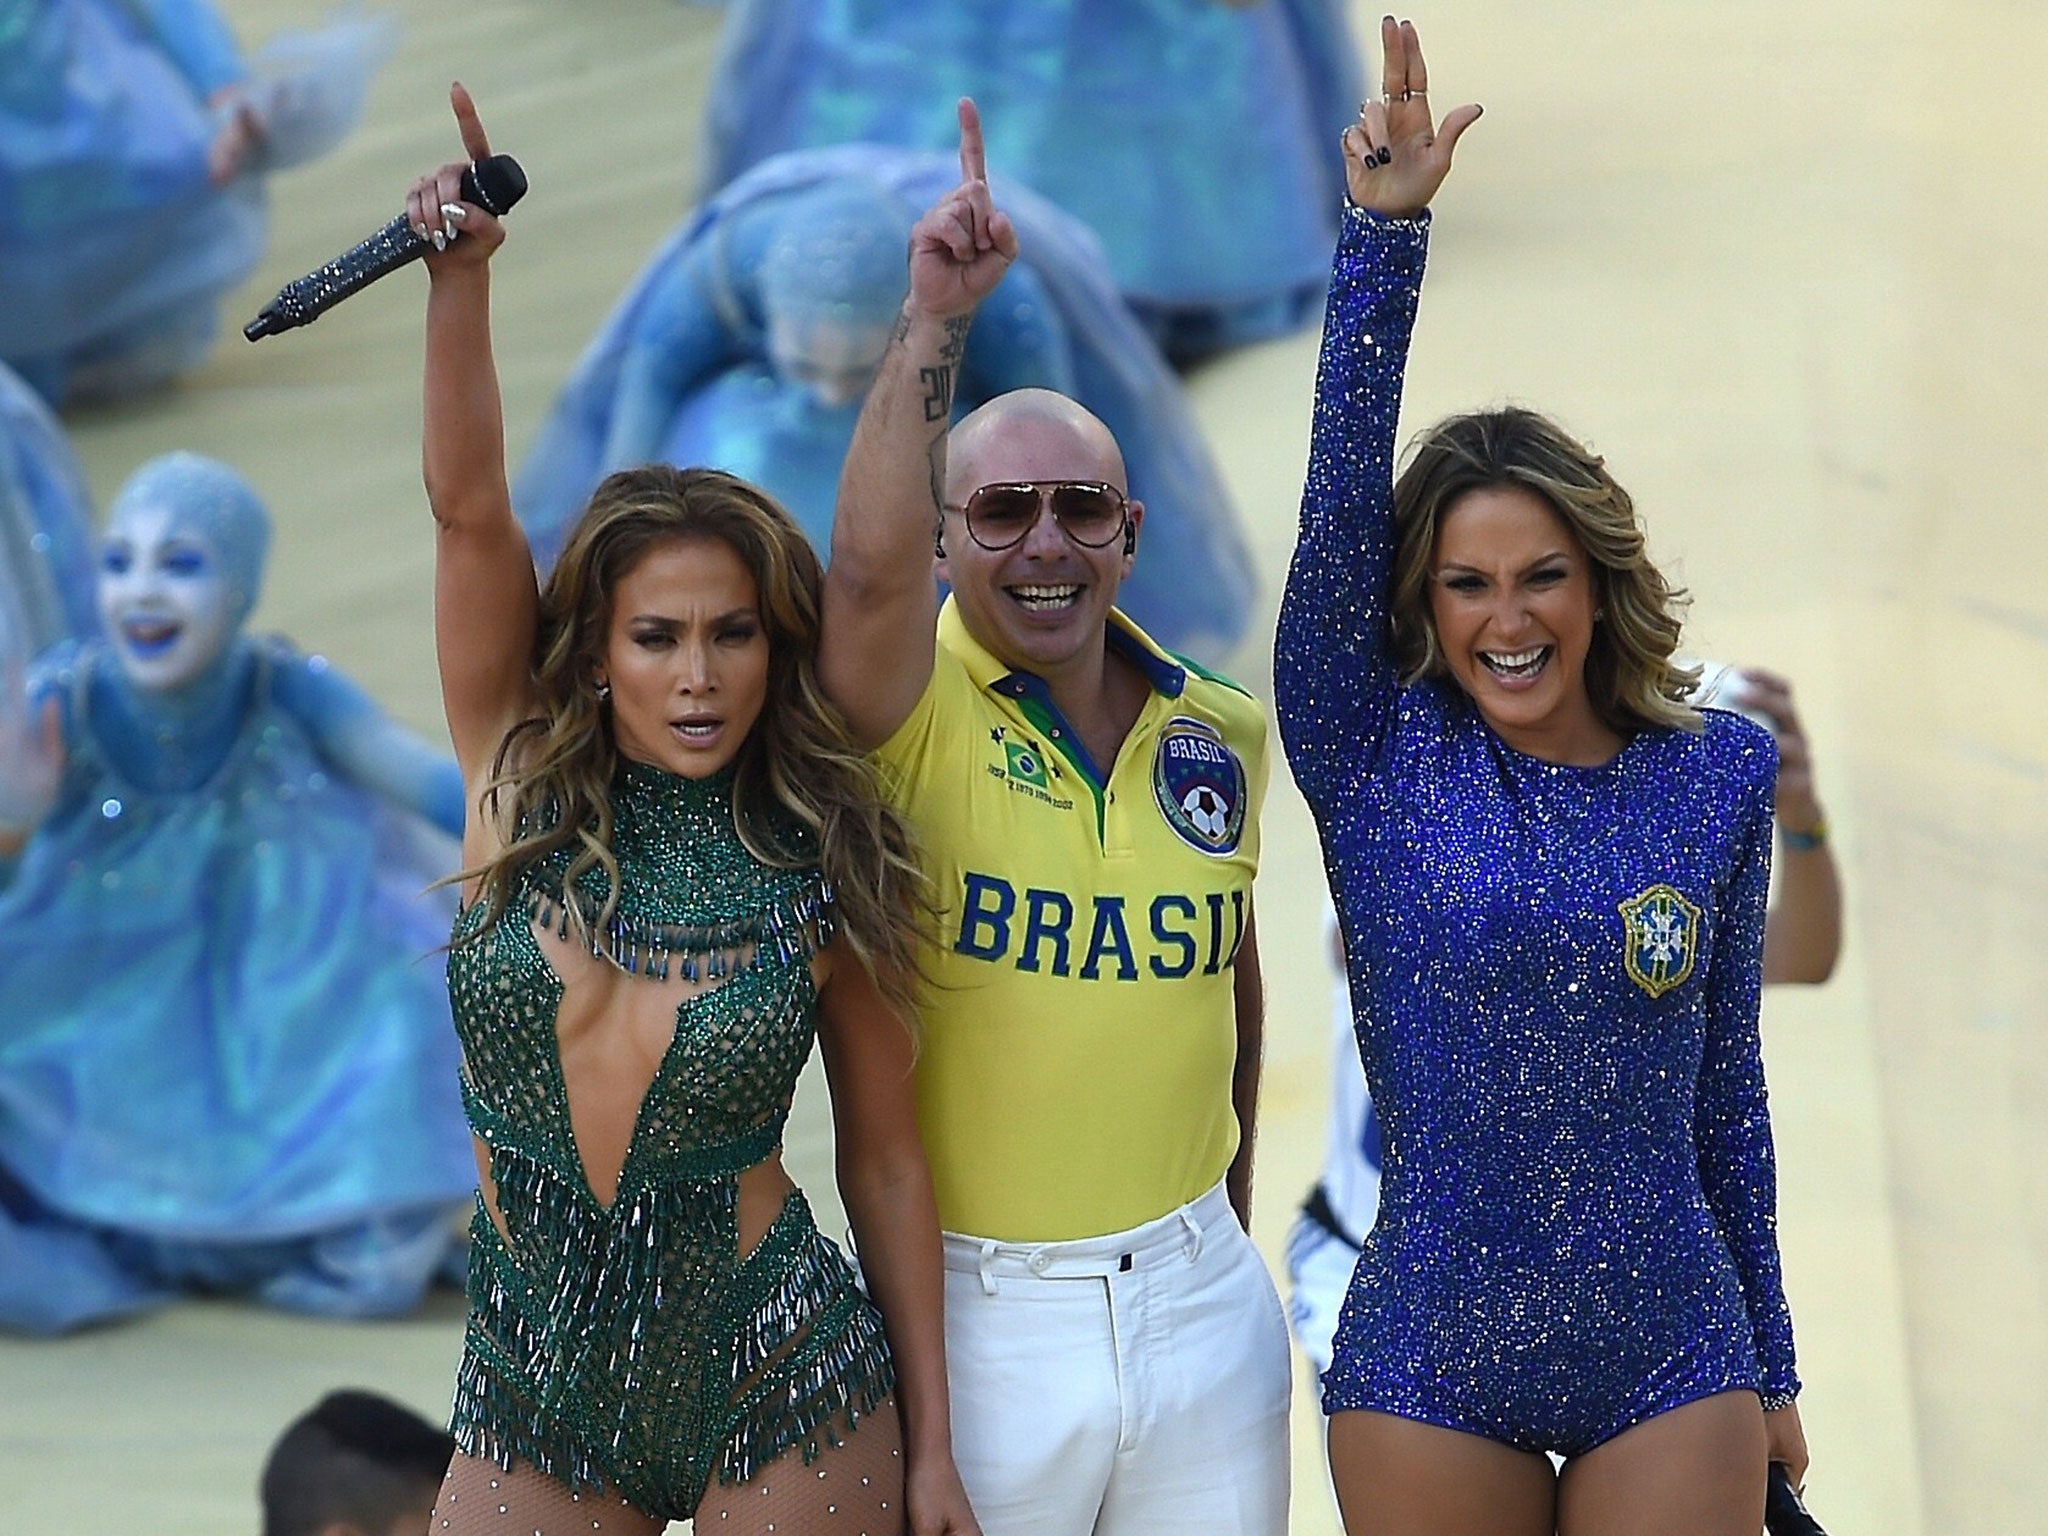 US rapper Pitbull (C) Brazilian pop singer Claudia Leitte (R) and US singer Jennifer Lopez (L) salute the audience as they take part in the opening ceremony of the 2014 FIFA World Cup